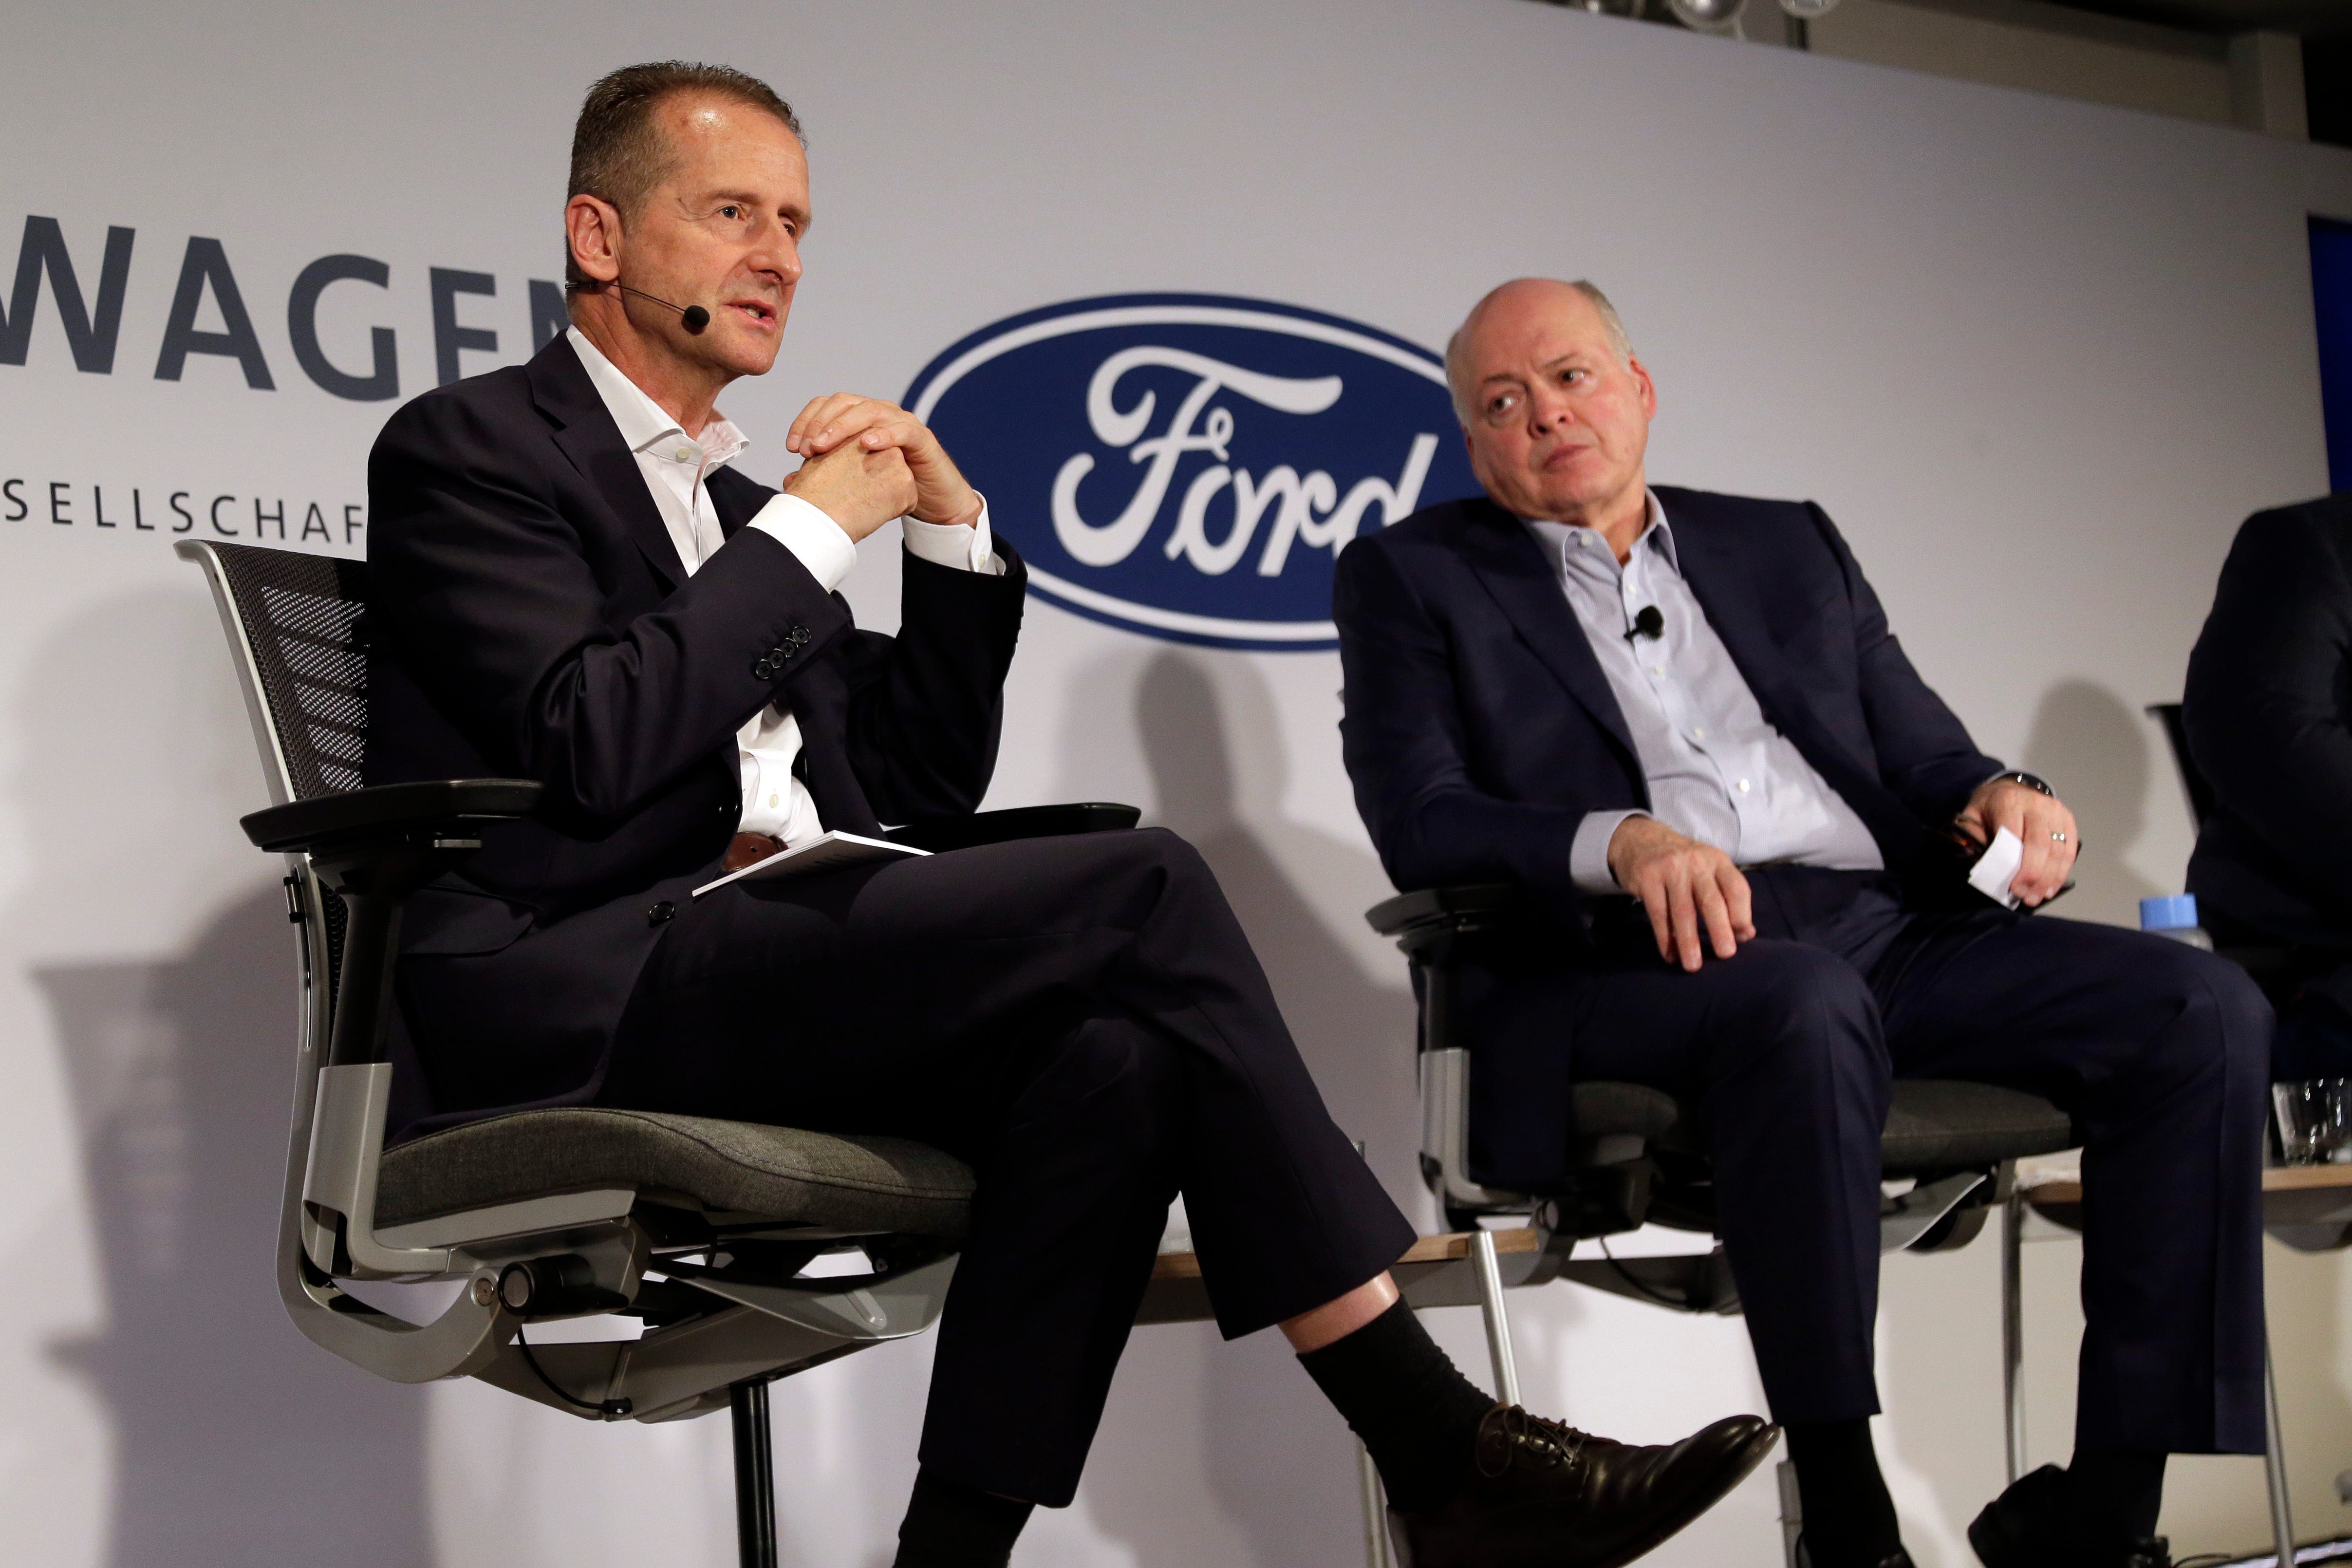 Volkswagen AG CEO Herbert Diess, left, and Ford Motor Co. CEO Jim Hackett  at  a news conference Friday in New York. The two automakers will to share electric vehicle platforms and self-driving software, potentially saving each company hundreds of millions of dollars.